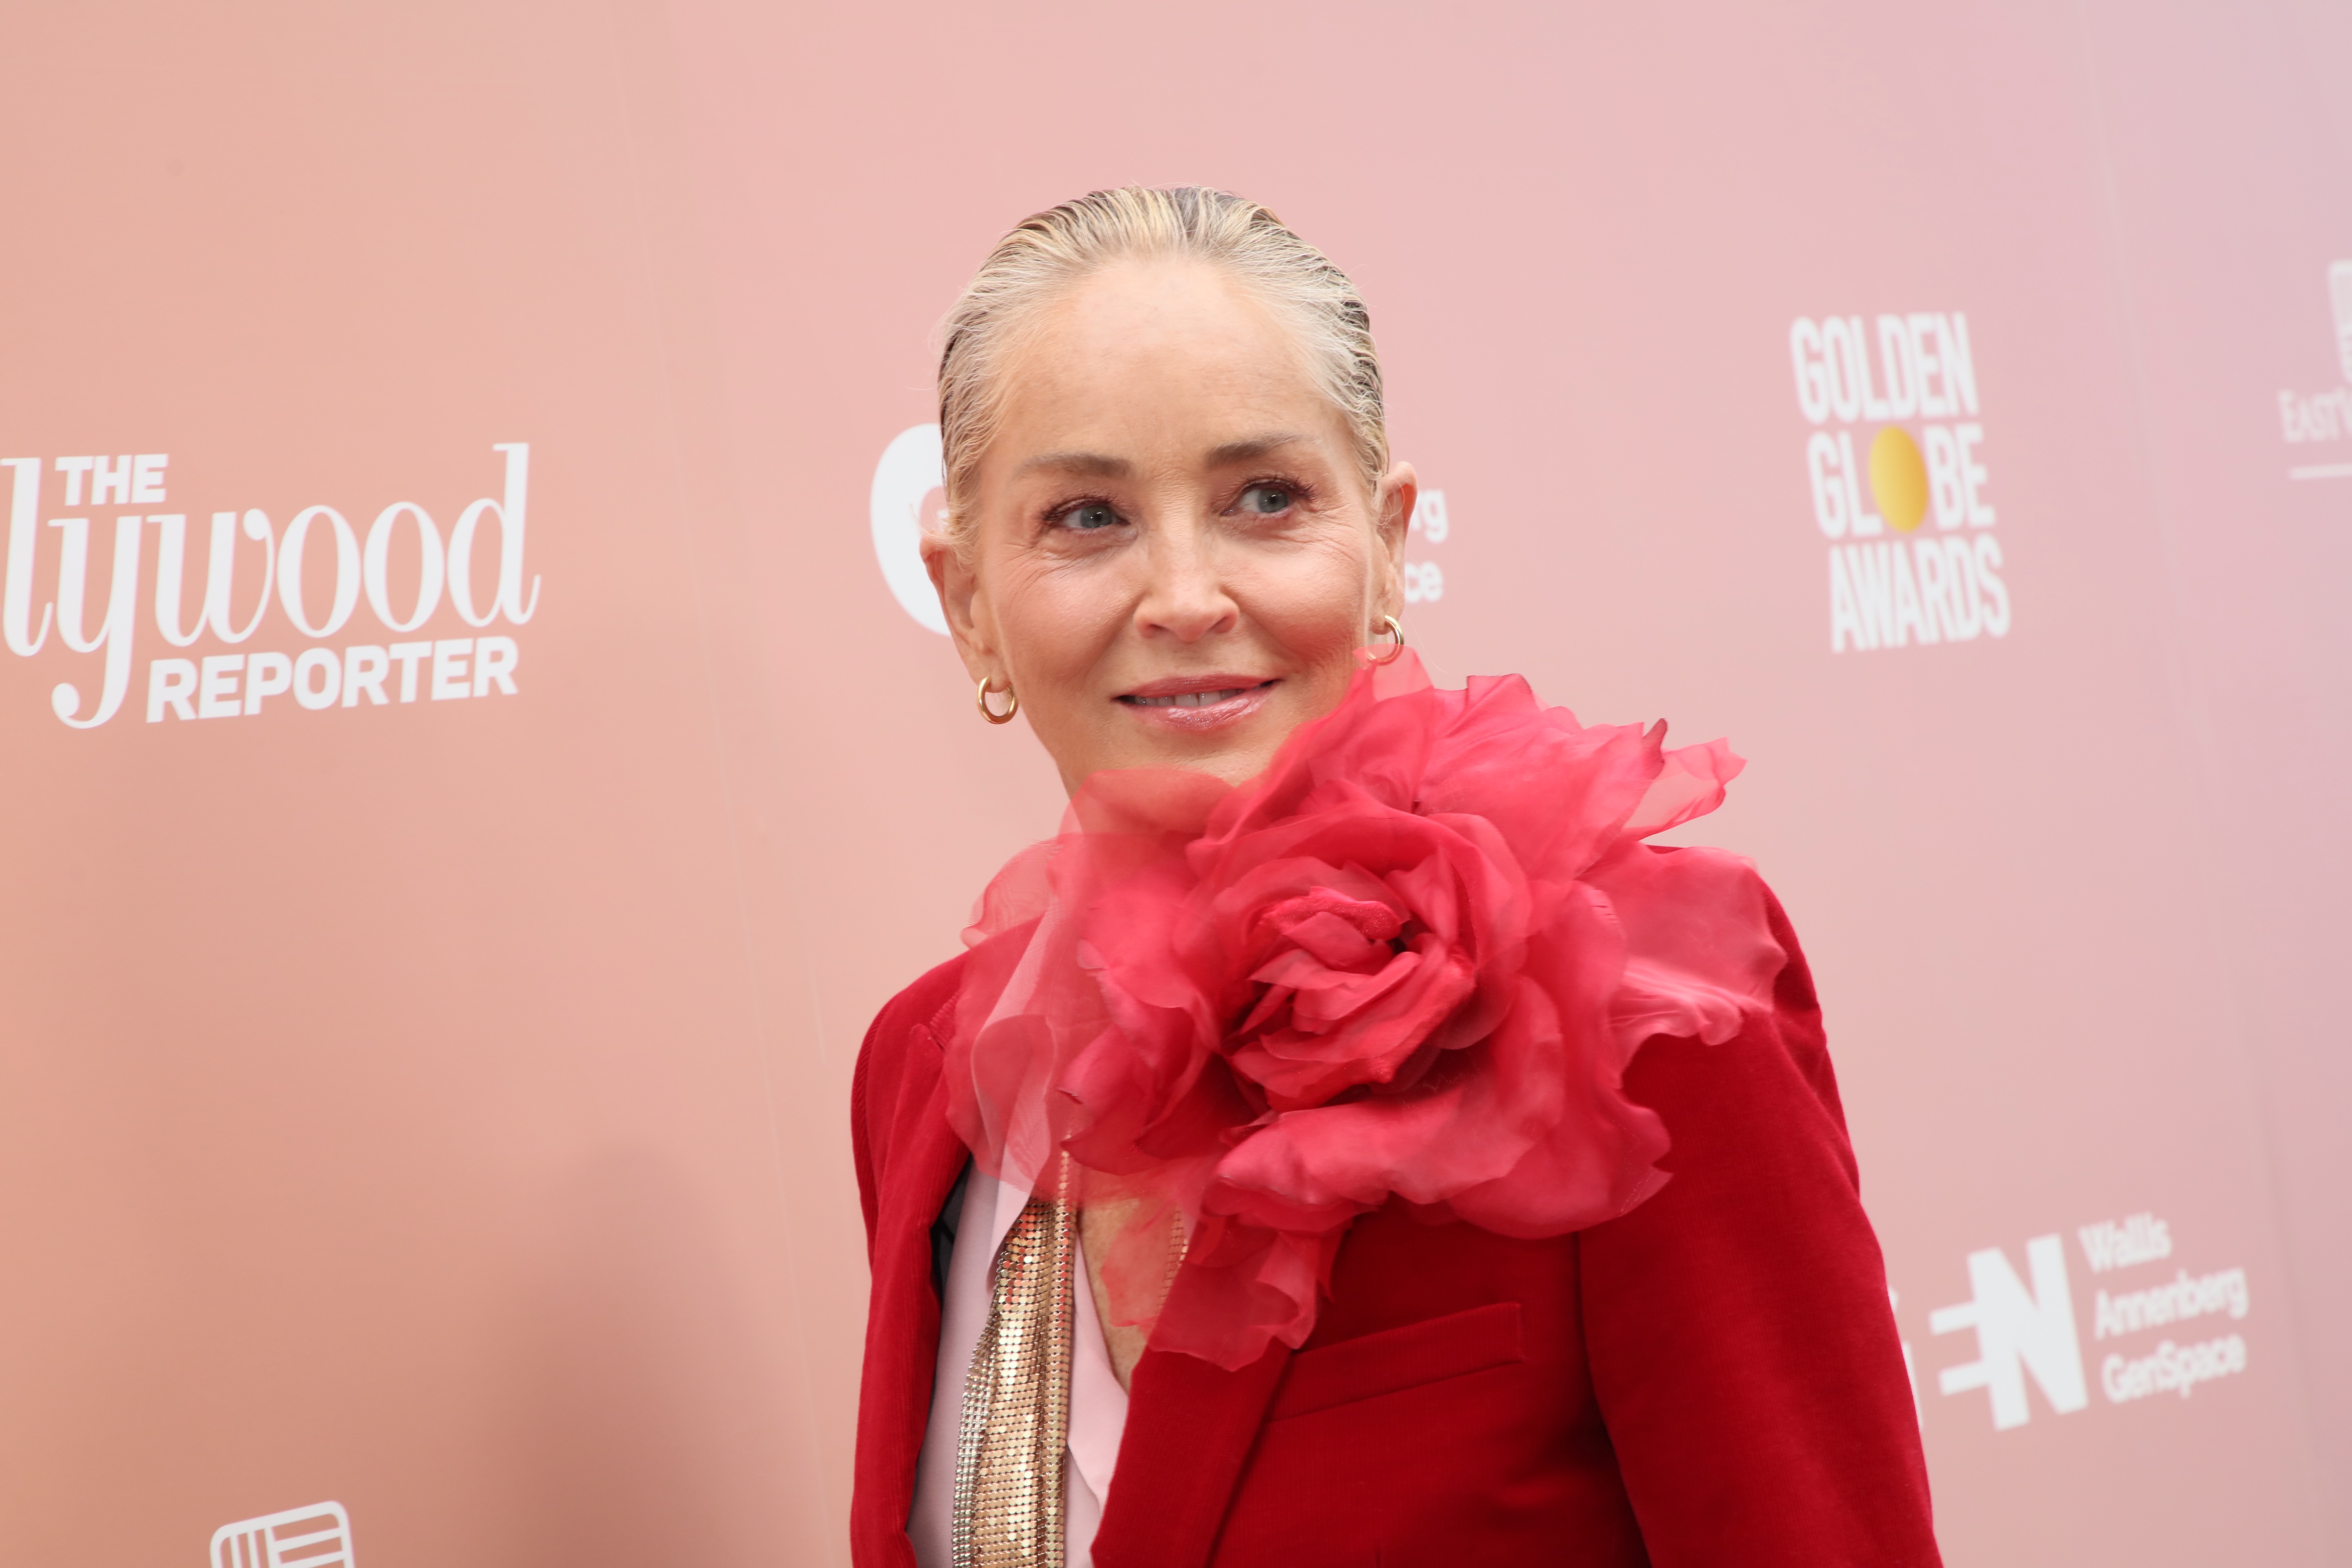 Actress Sharon Stone attends The Hollywood Reporter 2nd Annual "Raising Our Voices" event at Audrey Irmas Pavilion on May 31, 2023, in Los Angeles, California. | Source: Getty Images